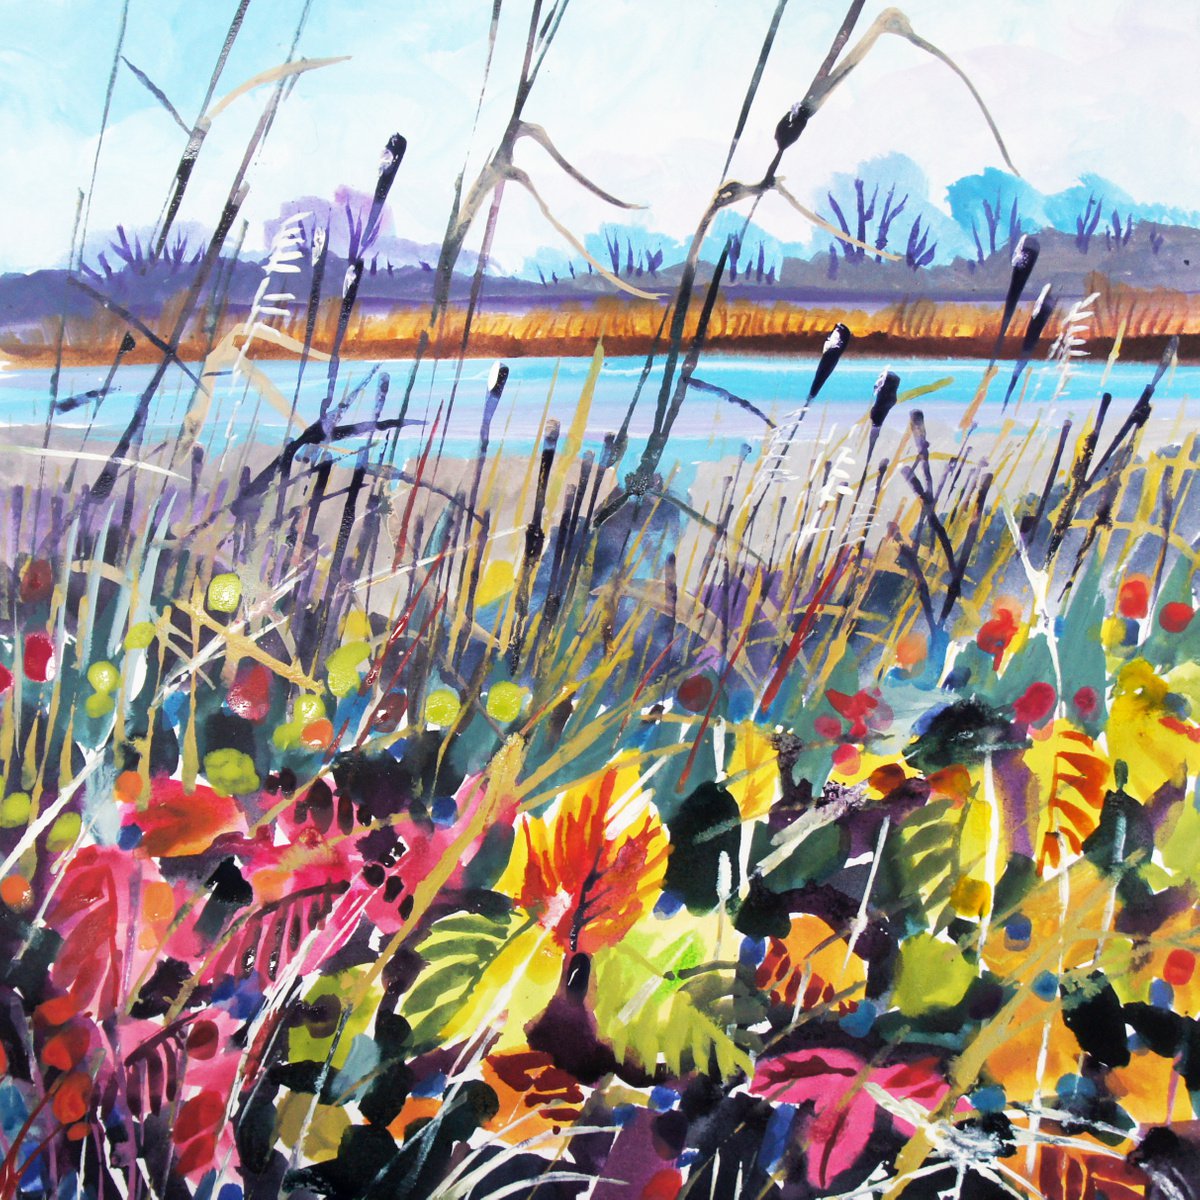 Bramble Leaves in Autumn by the waters edge by Julia Rigby